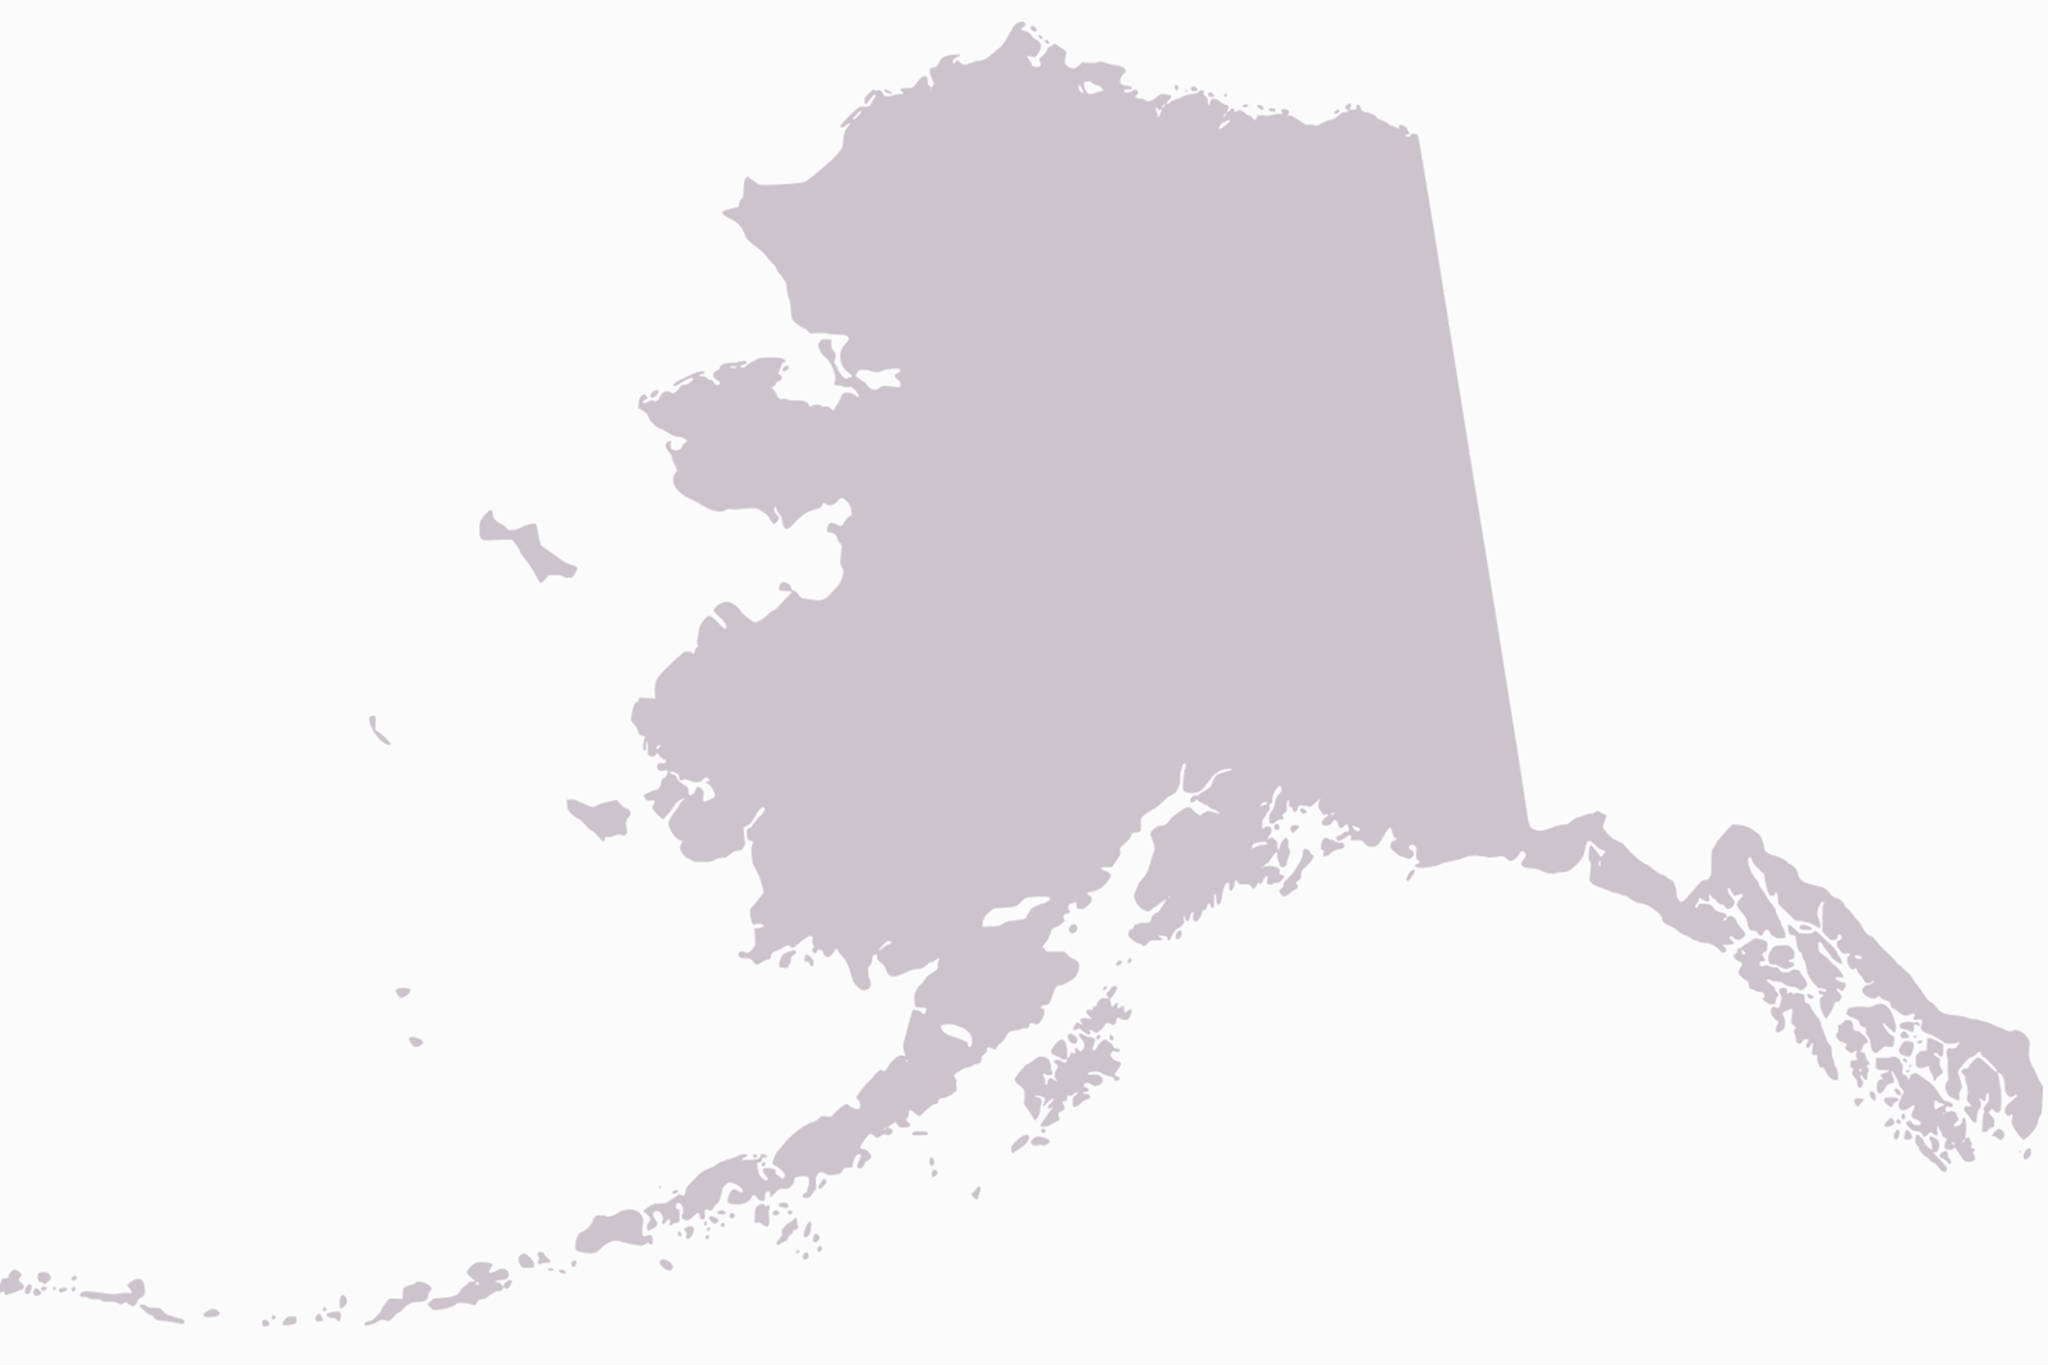 The state of Alaska is readying for the 2020 census, which will help determine how much federal money the state receives and impact the redistricting process.